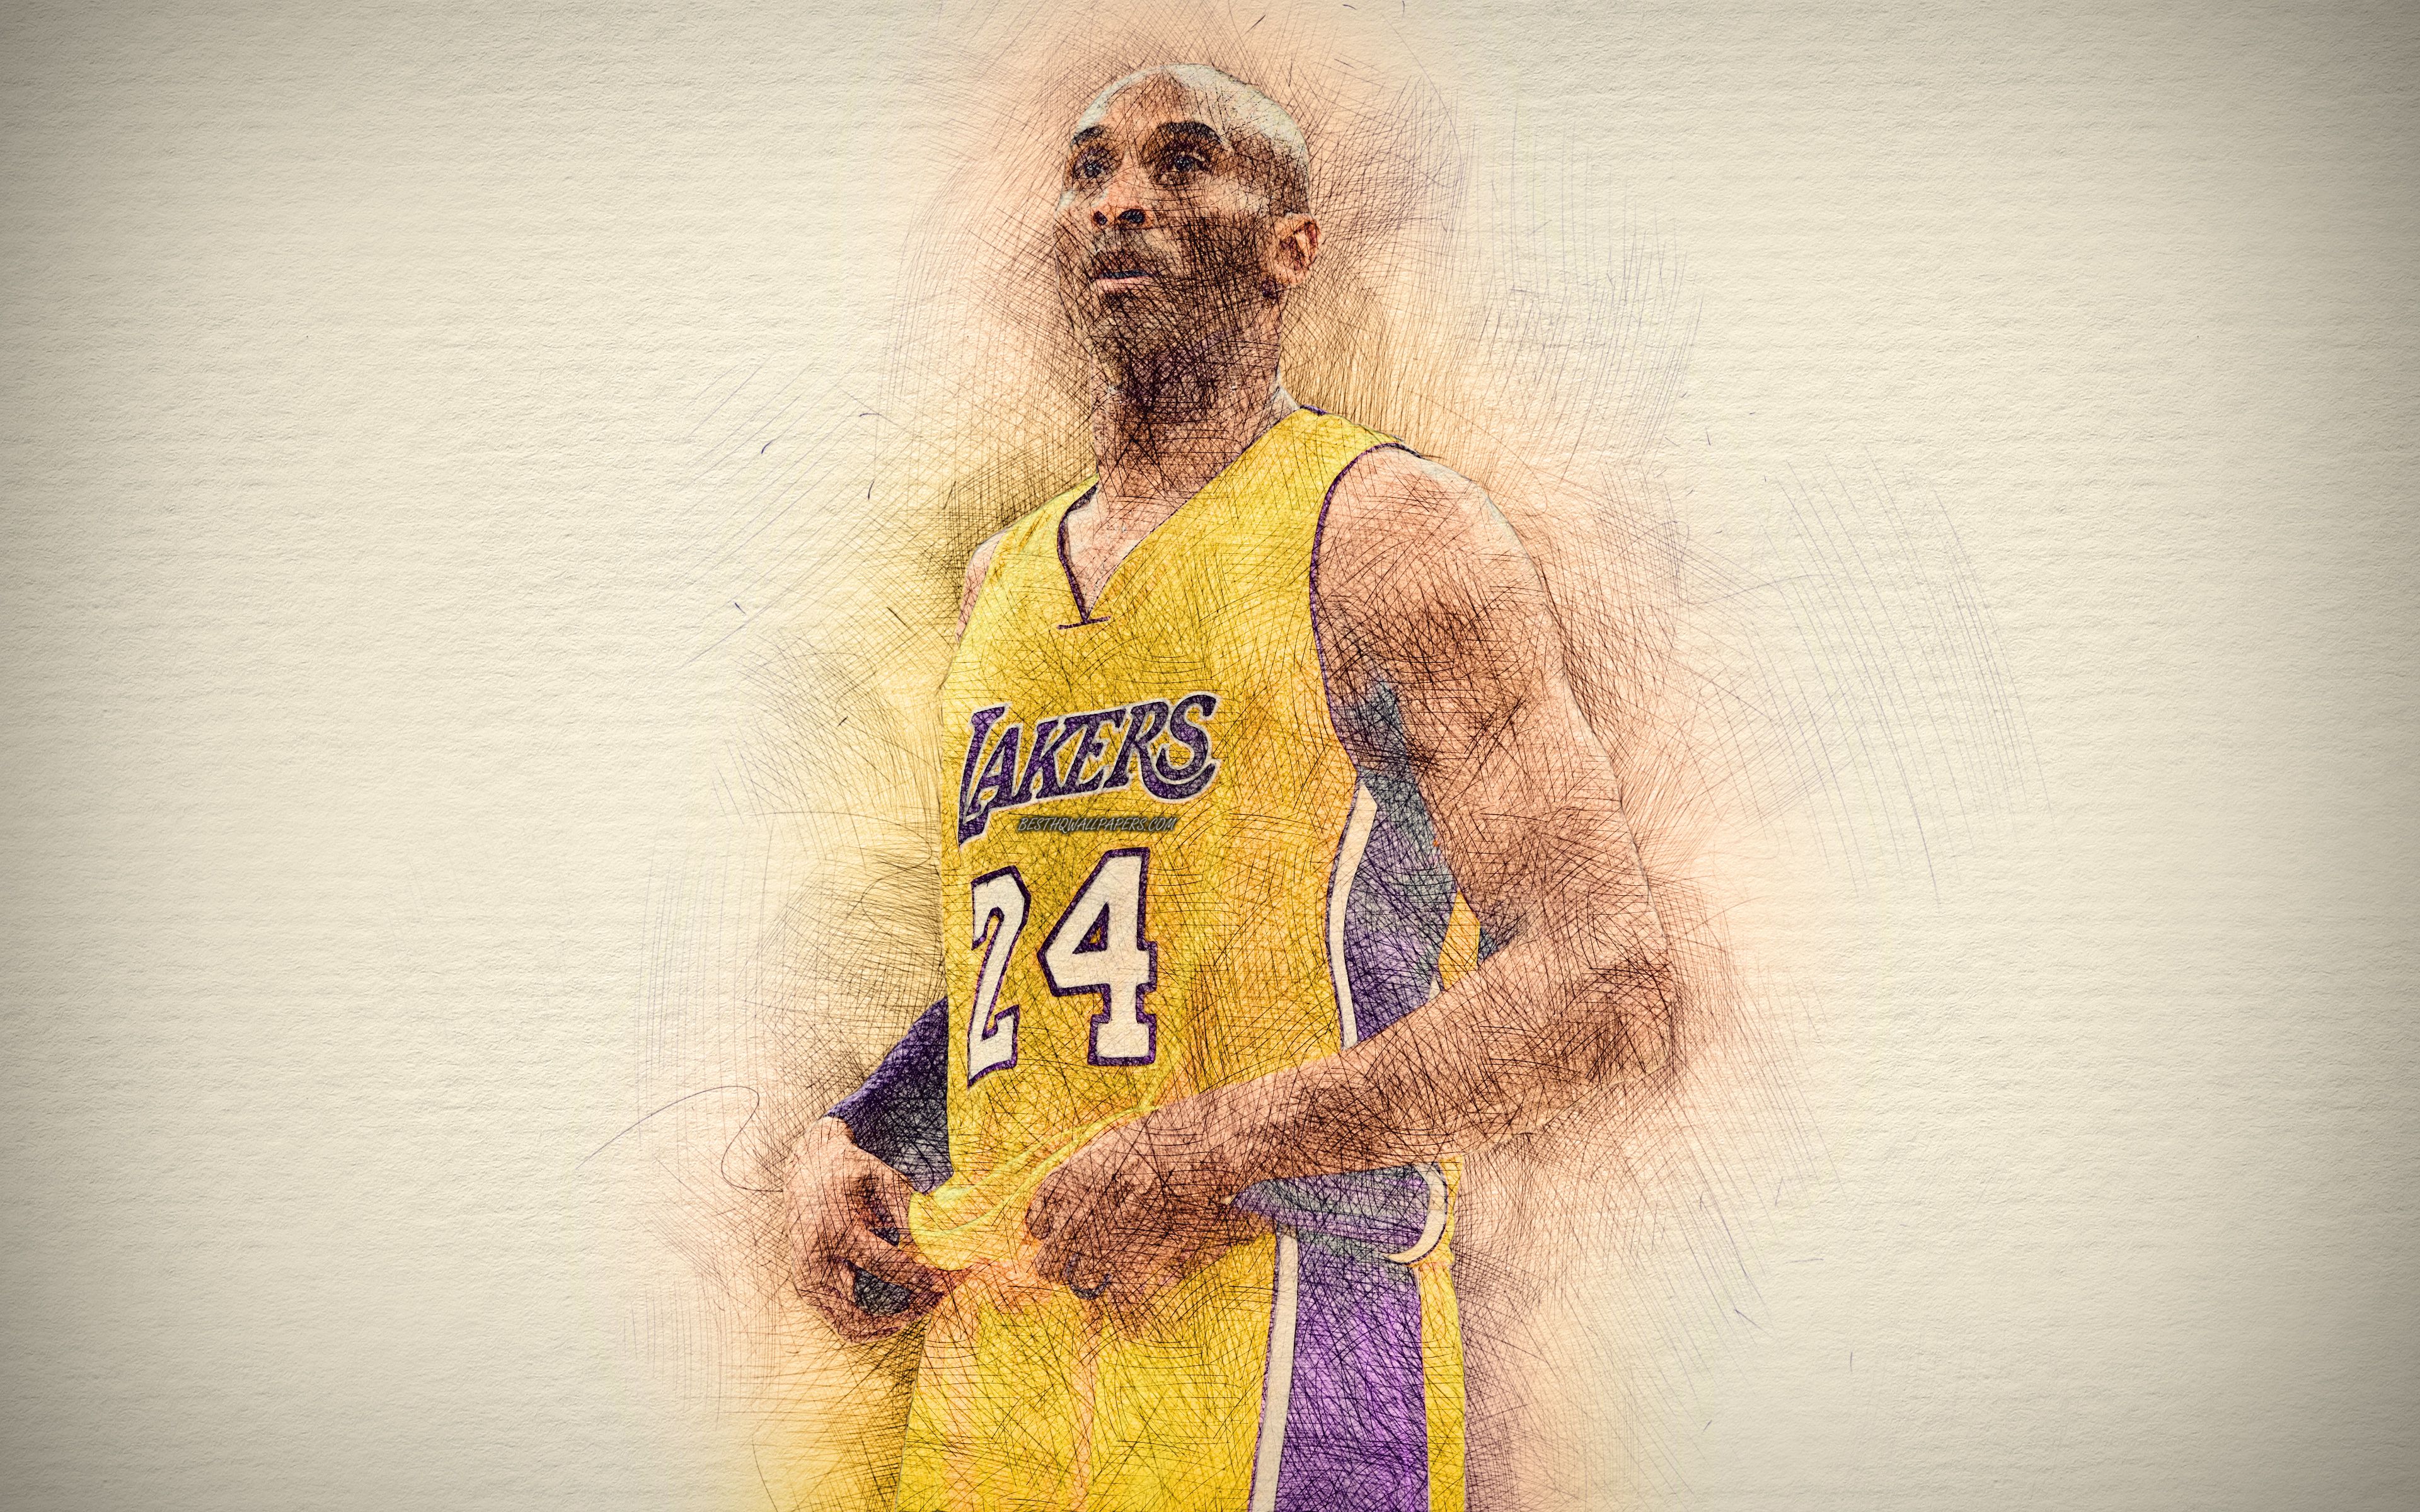 Download wallpaper Kobe Bryant, 4k, artwork, basketball stars, Los Angeles Lakers, NBA, basketball, LA Lakers, drawing Kobe Bryant, Kobe Bean Bryant for desktop with resolution 3840x2400. High Quality HD picture wallpaper